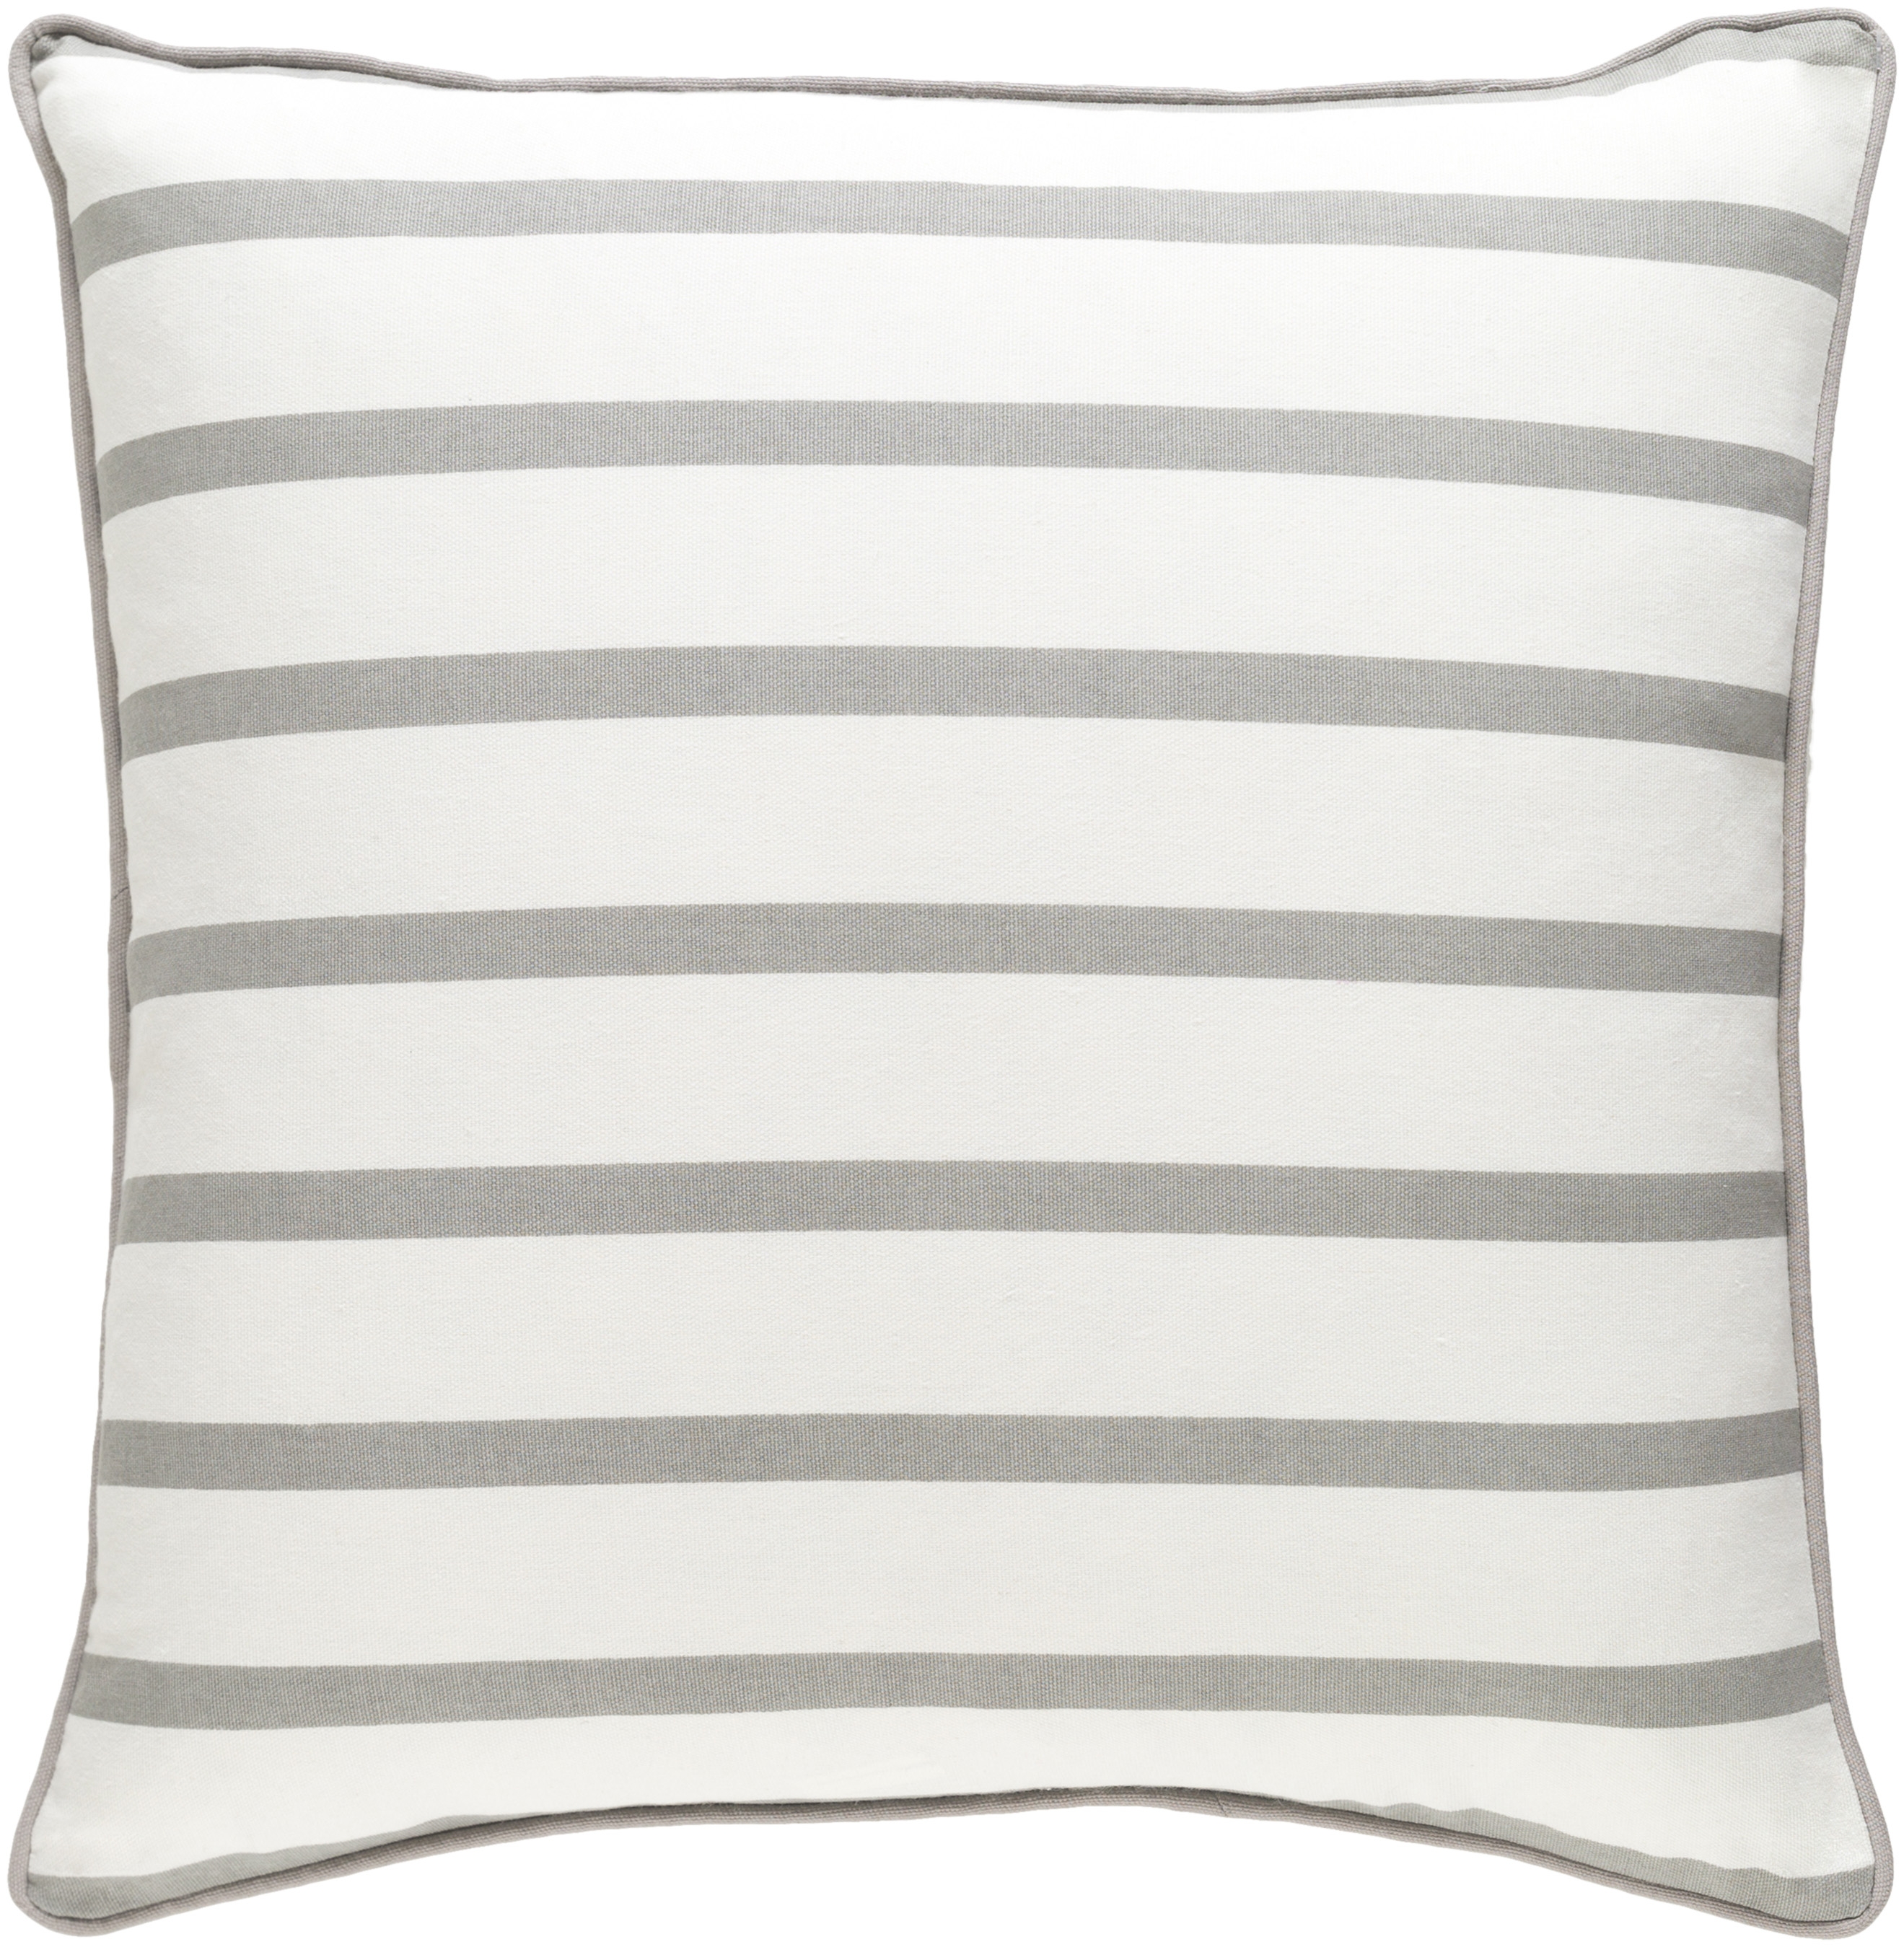 Glyph - GLYP-7077 - 18" x 18" - pillow cover only - Image 0